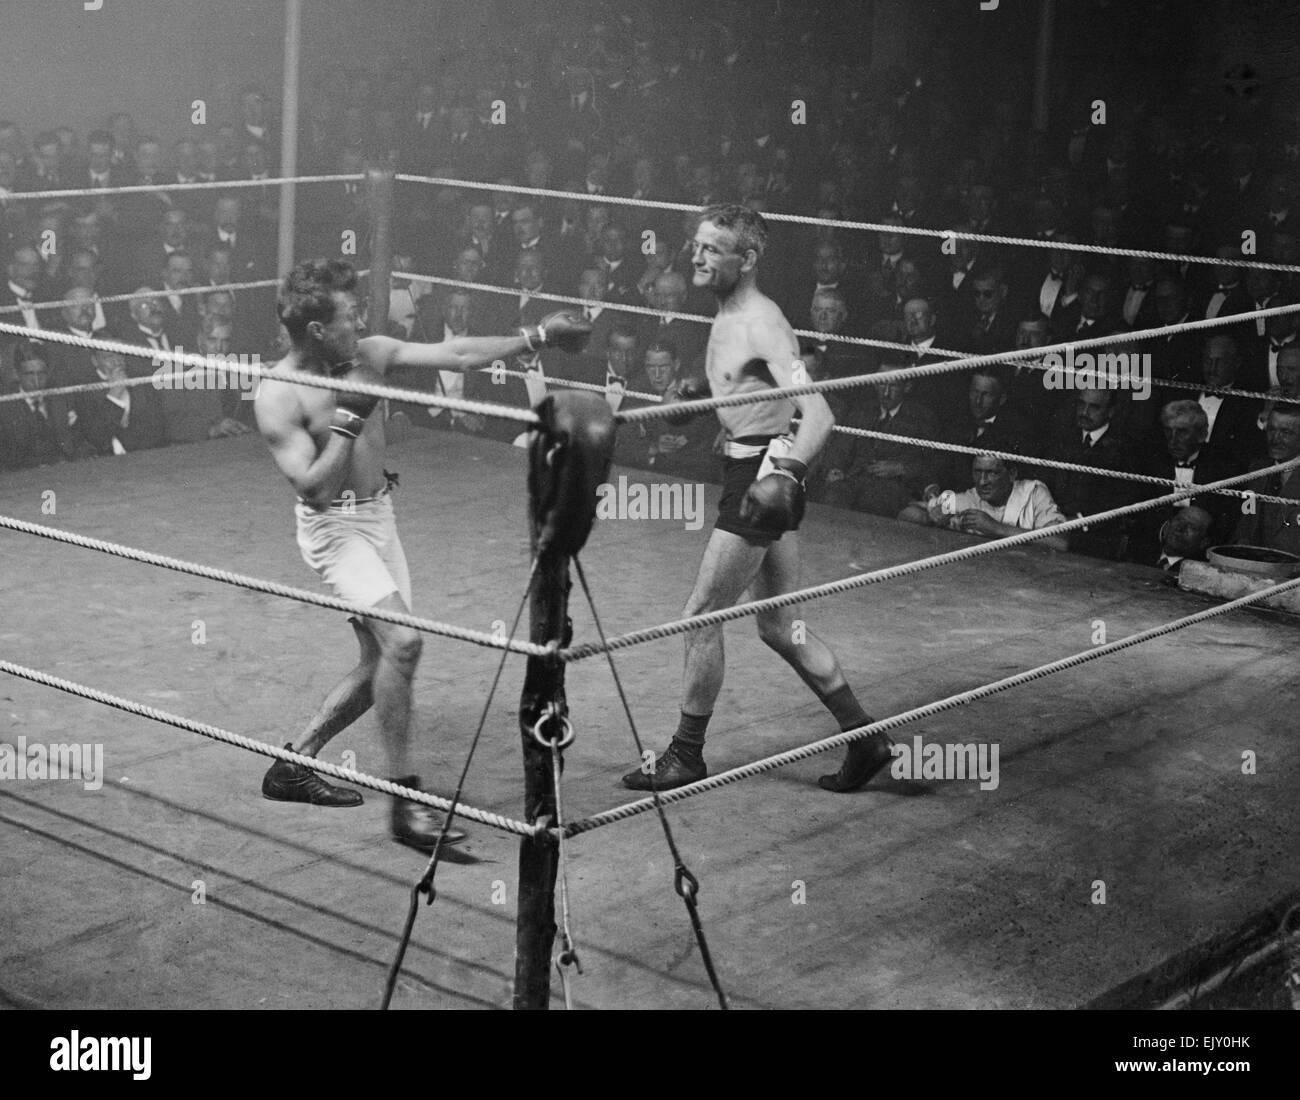 Jim Driscoll and Charles Ledoux seen here during their European bantamweight title fight at the Nationbal Sports Club in Covent Garden. 20th October 1919. Ledoux known as the Little Apache won by a technical knock out. Stock Photo